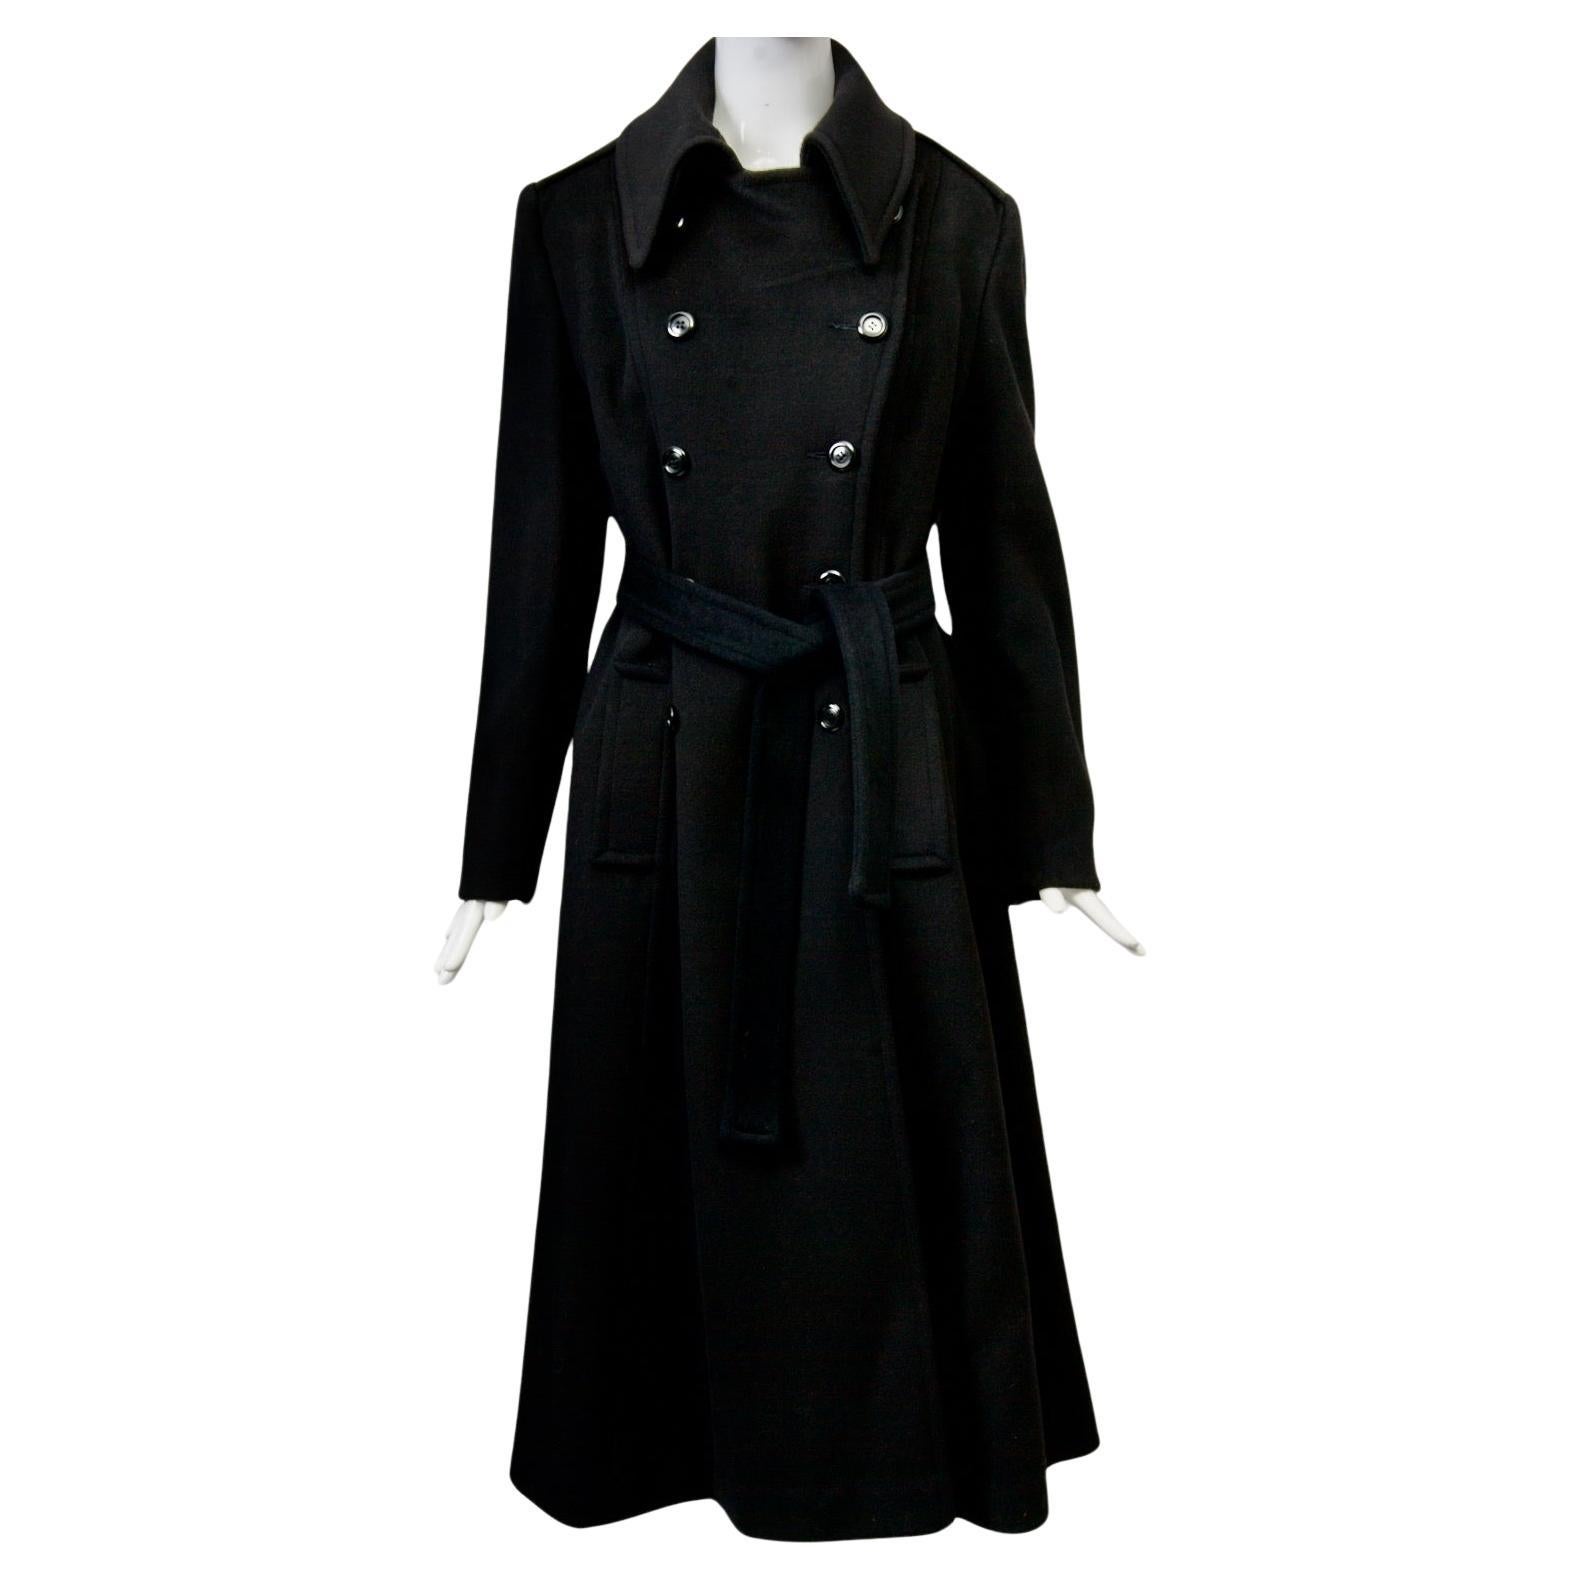 Black plush wool maxi coat features double-breasted styling and self sash. The coat buttons up to the pointed collar. Set-in sleeves with two buttons at each wrist and shoulder epaulets. Vertical bound pockets are positioned adjacent to welted seams